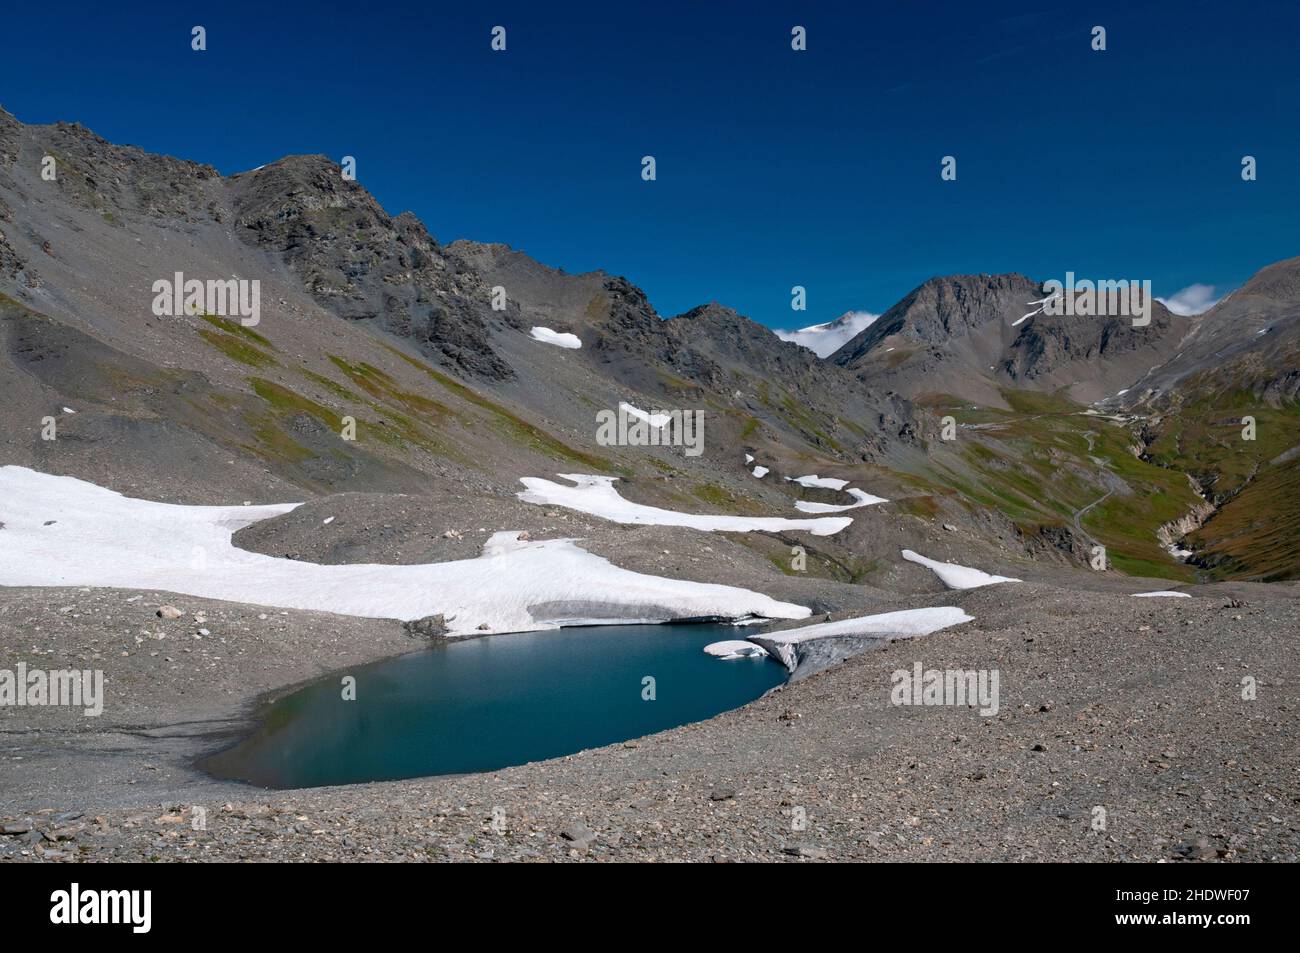 The lake of the ancient La Jave glacier with Signal de l’Iseran summit (3237m) and Pers mountain pass in the background, Vanoise massif, Haute-Maurien Stock Photo